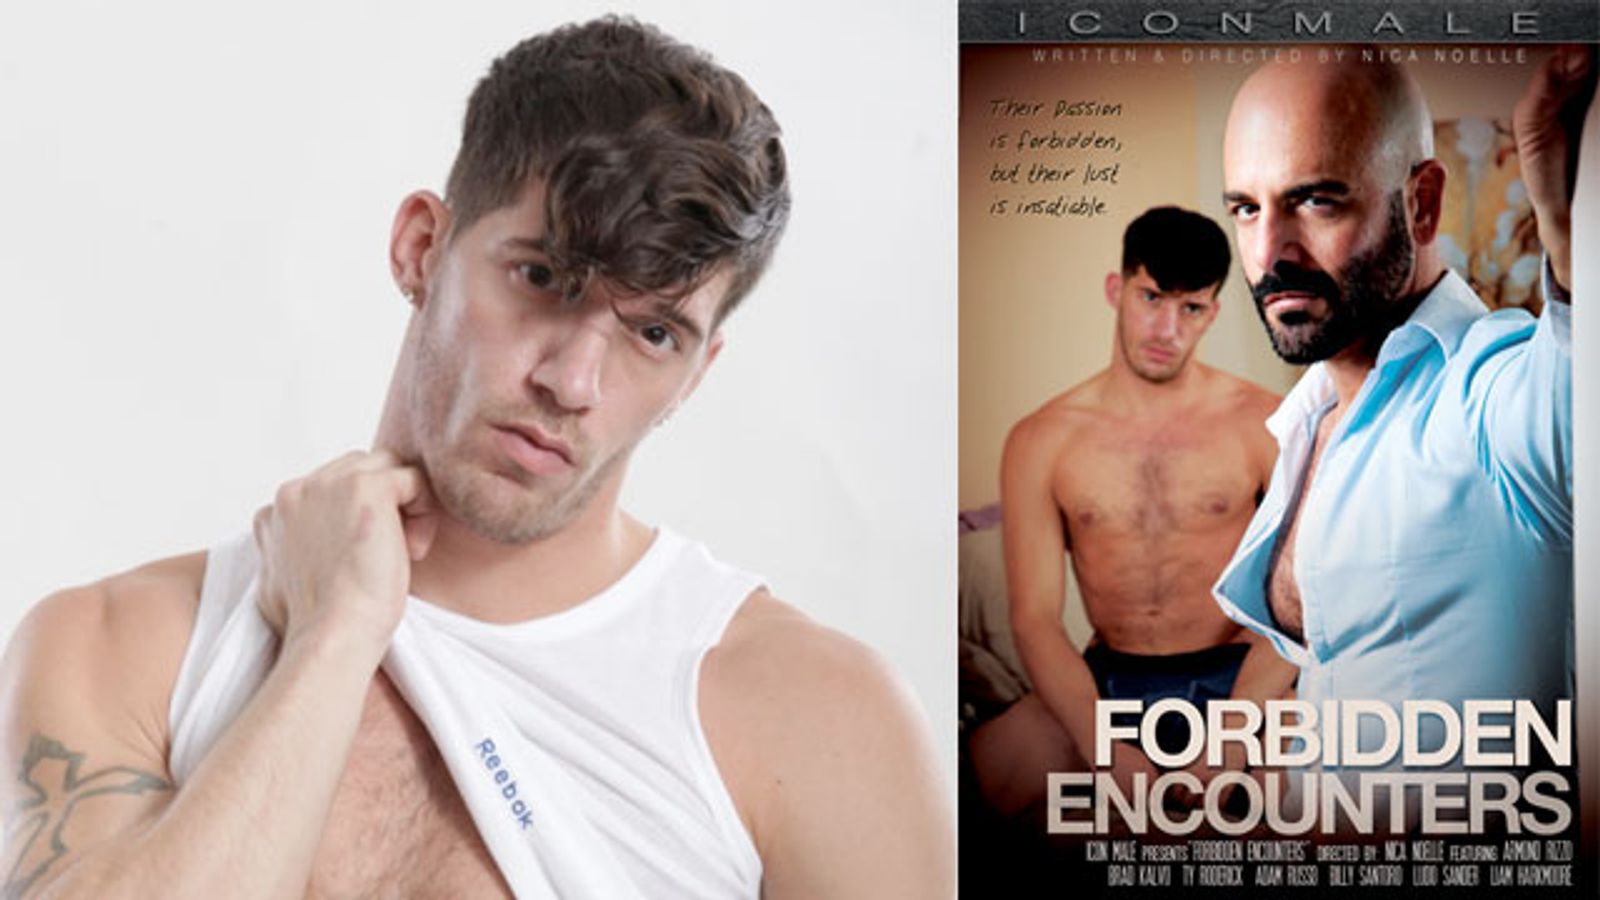 'Forbidden Encounters' is Sophomore Release for Icon Male